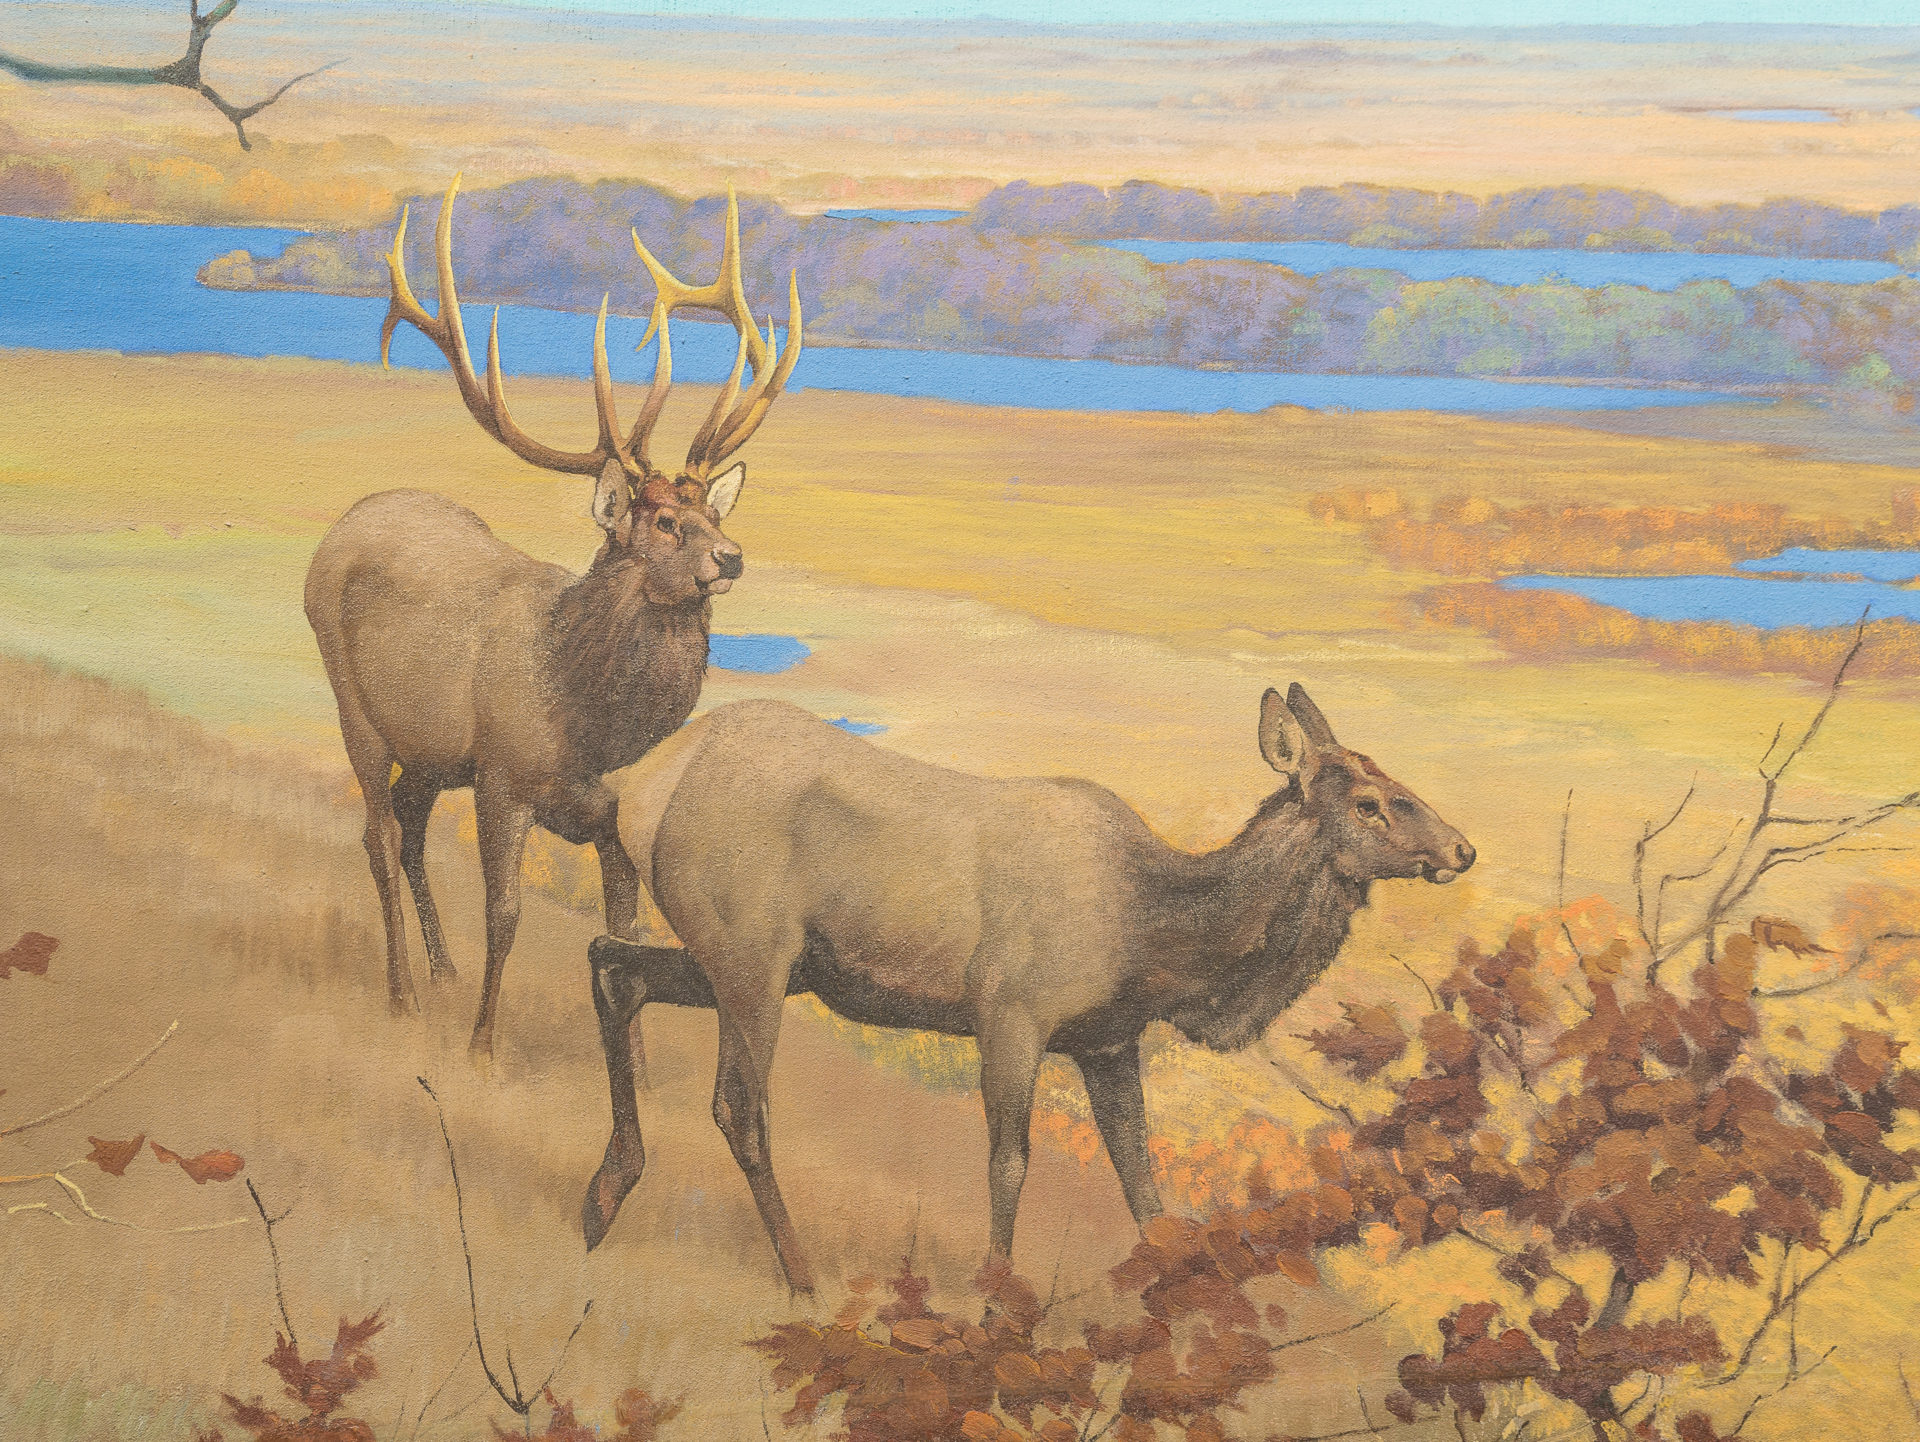 Jaques painting of 2 elk closer in the valley